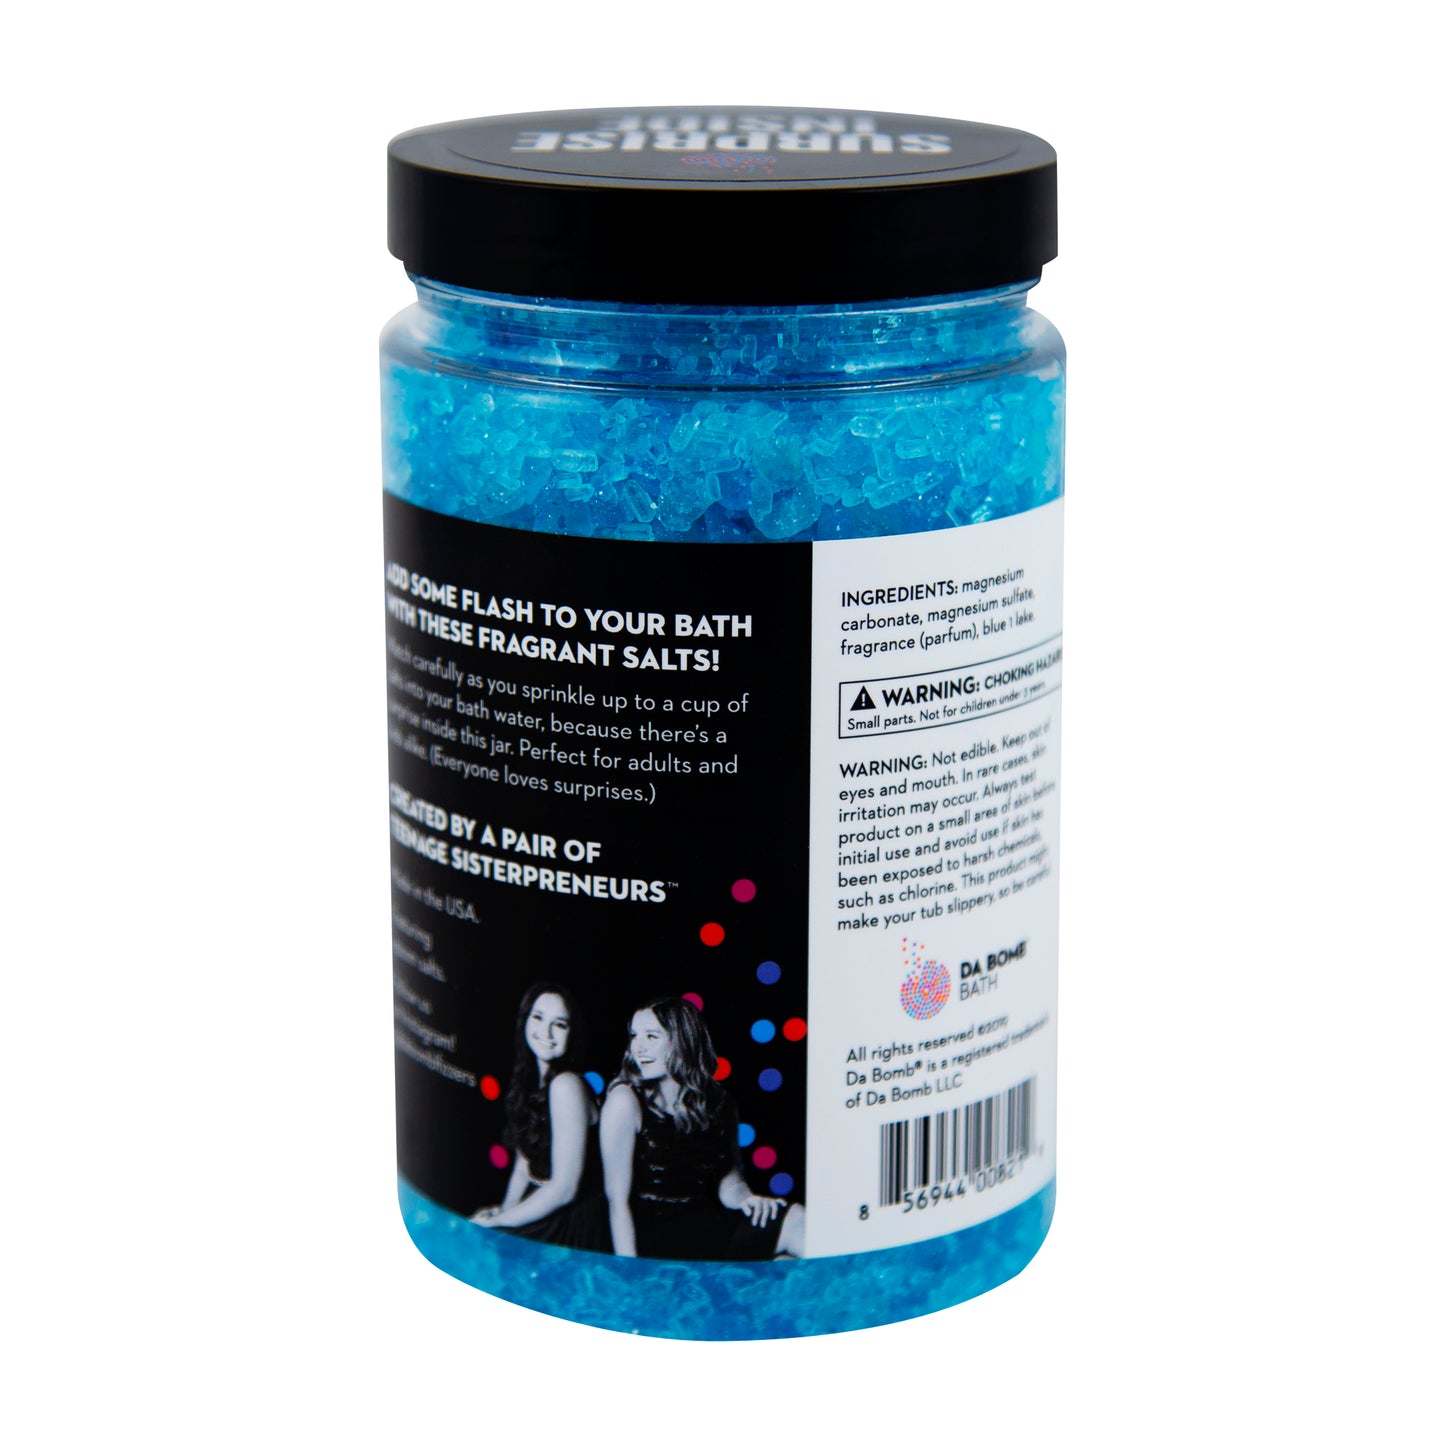 Back of clear plastic jar filled with blue bath salt that smells like blueberry lemongrass. Contains a fun surprise inside.